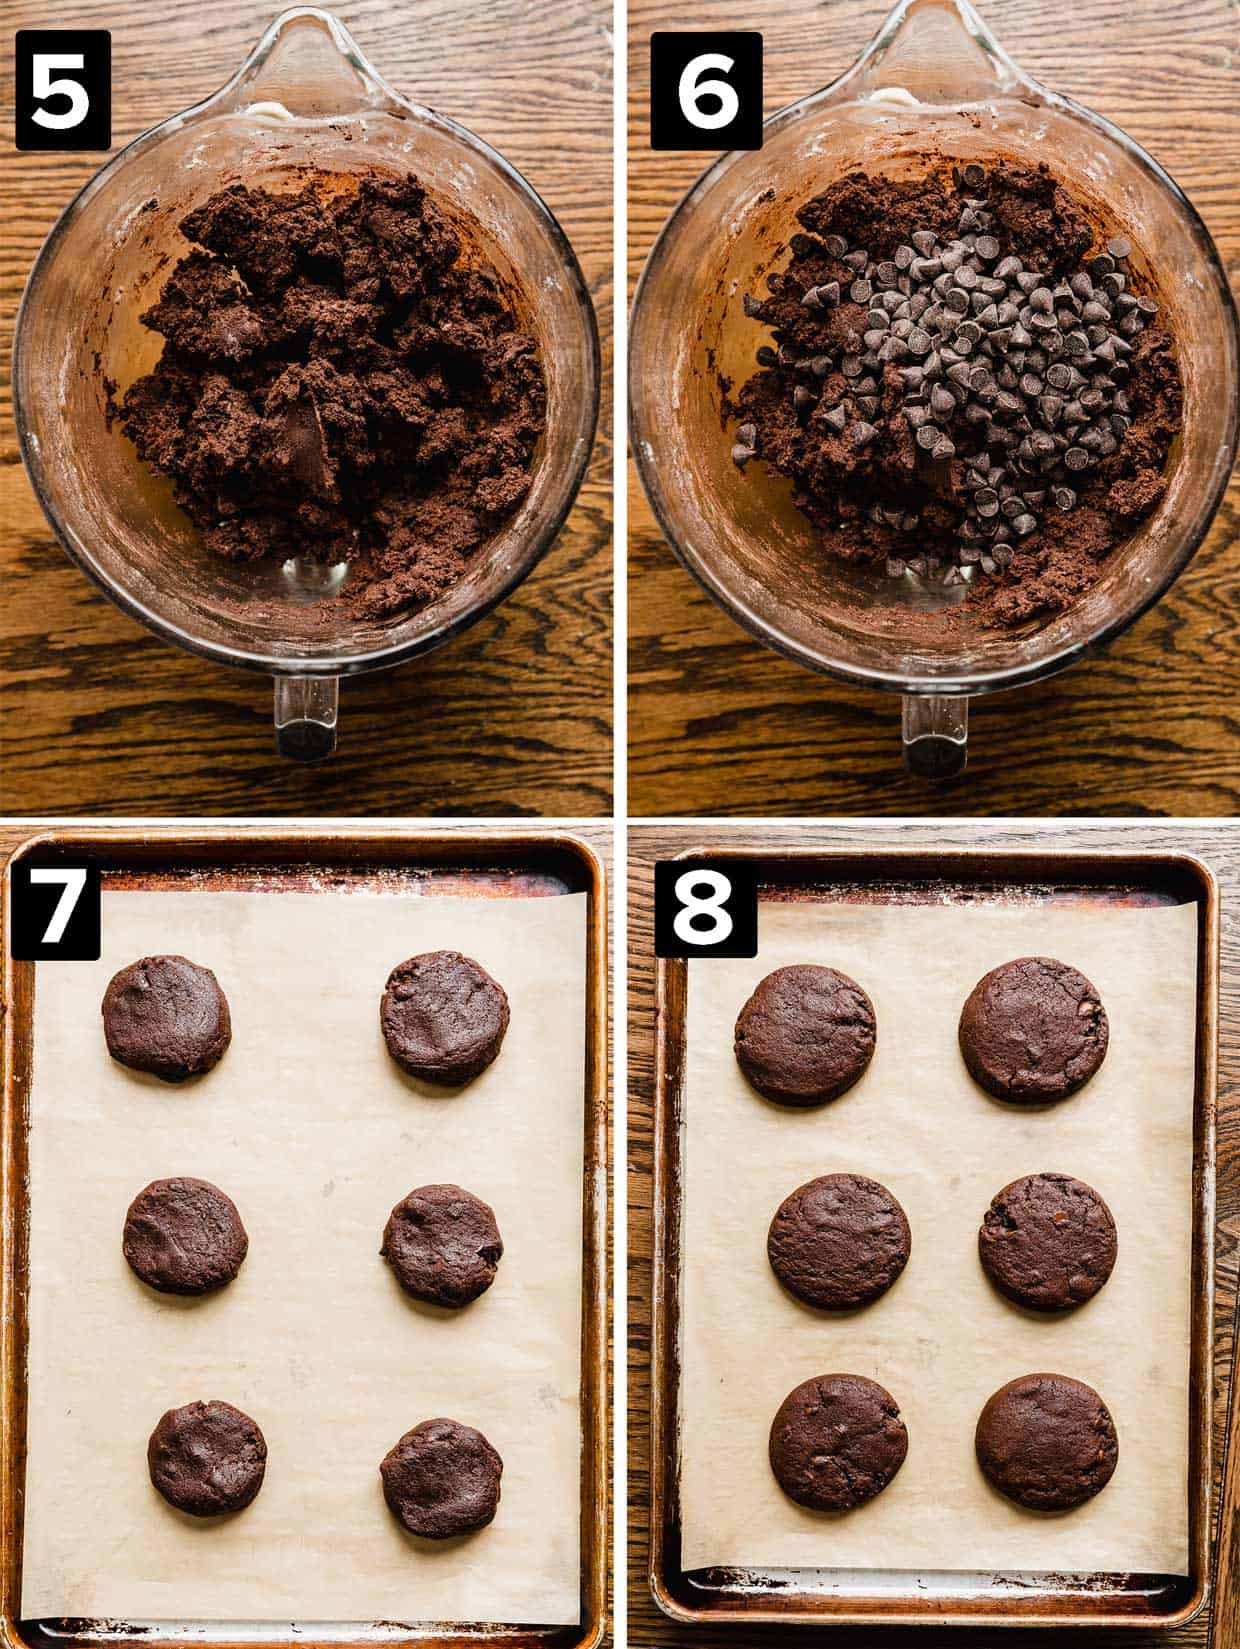 Four photos showing the making of copycat Crumbl Walnut Fudge Brownie Cookies, the brown cookie dough, with added chocolate chips, cookie dough balls on a baking sheet, and baked cookies on a baking sheet.